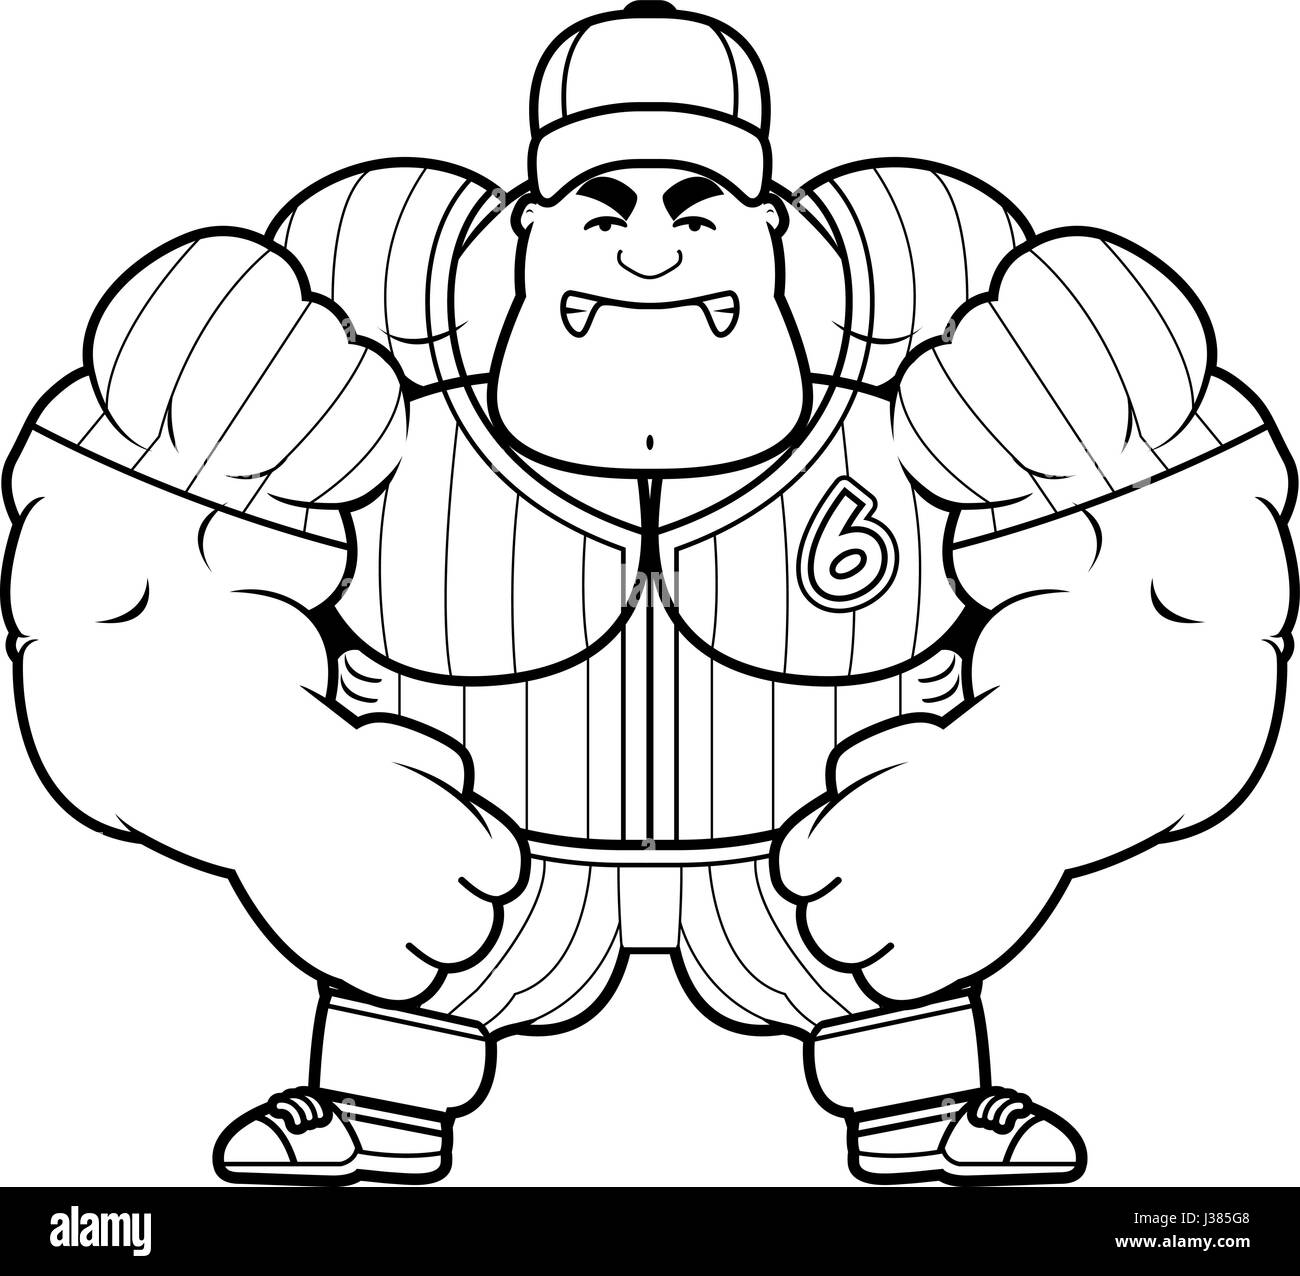 A cartoon illustration of a muscular baseball player looking angry. Stock Vector